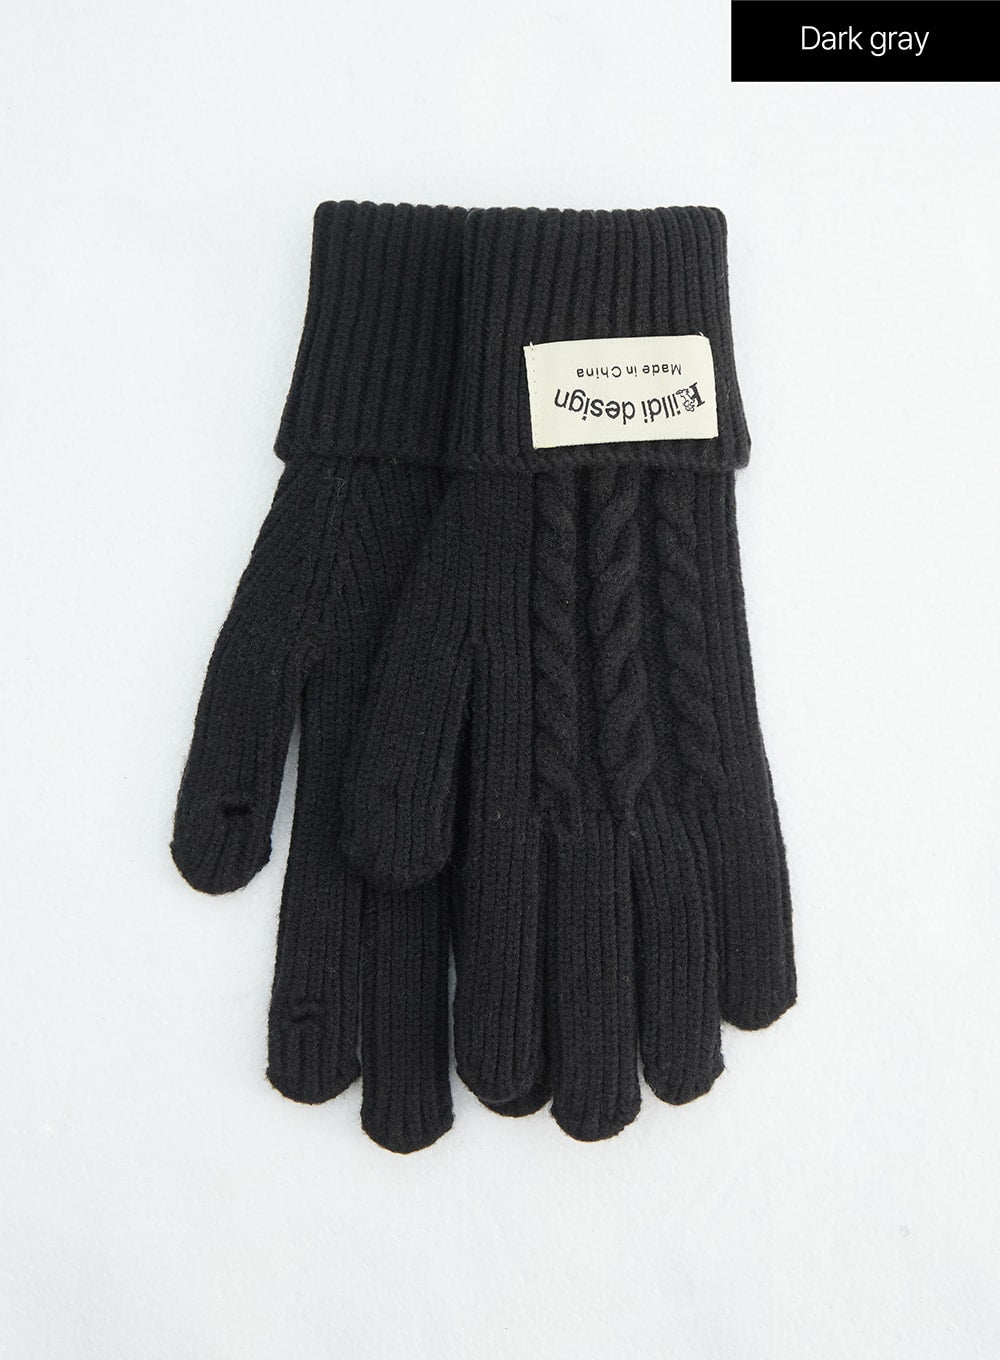 cable-knit-gloves-in317 / Dark gray